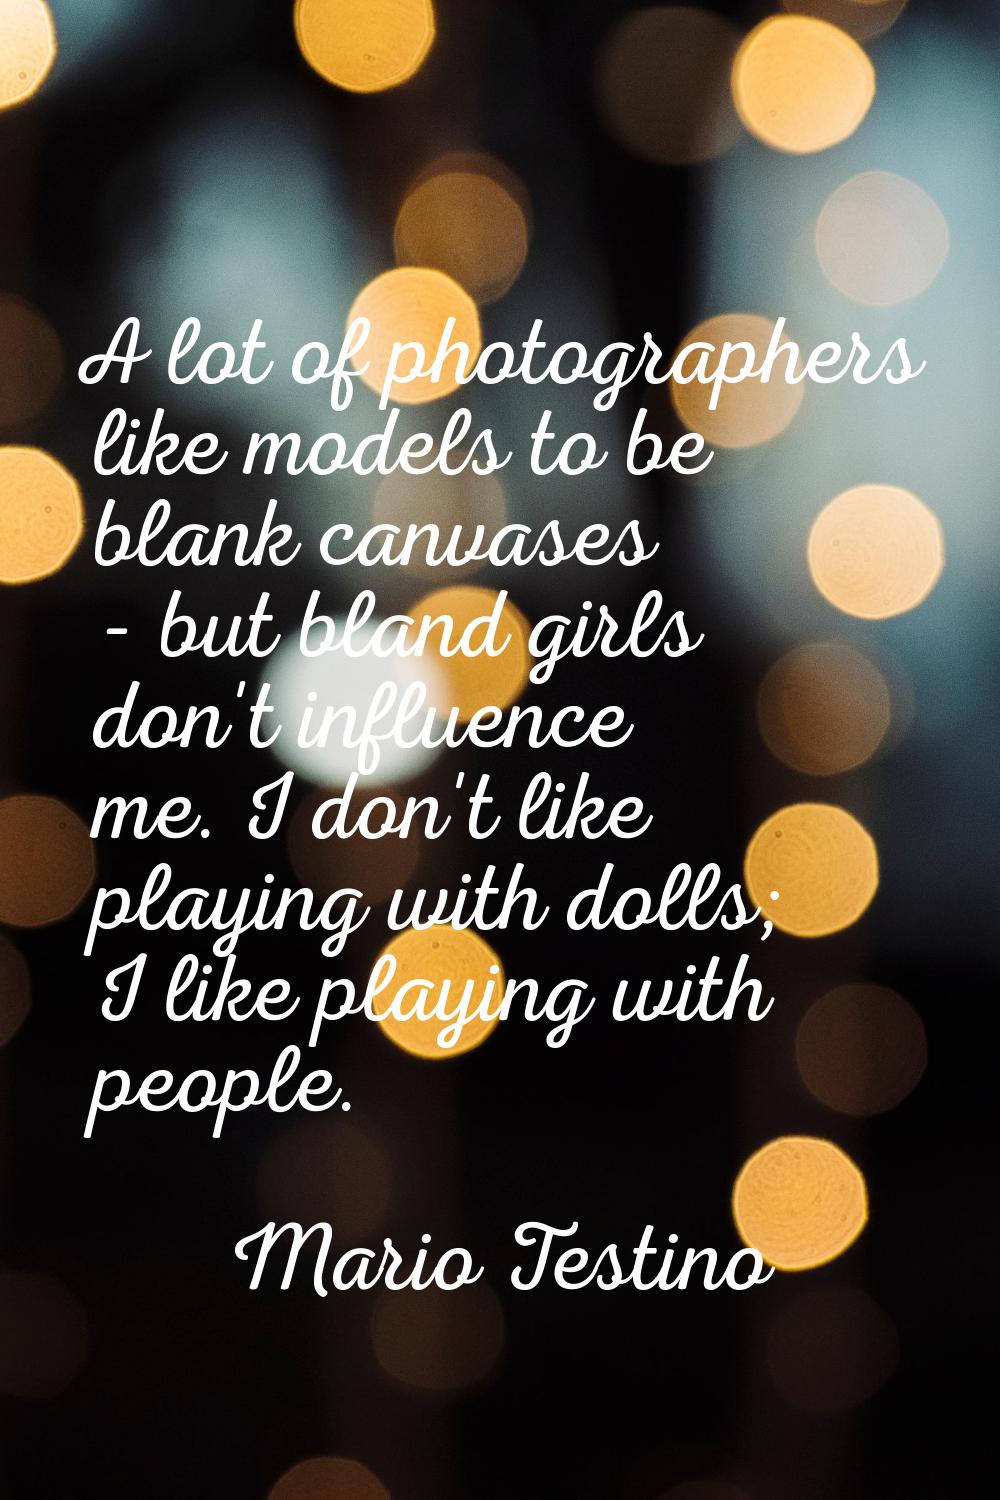 A lot of photographers like models to be blank canvases - but bland girls don't influence me. I don